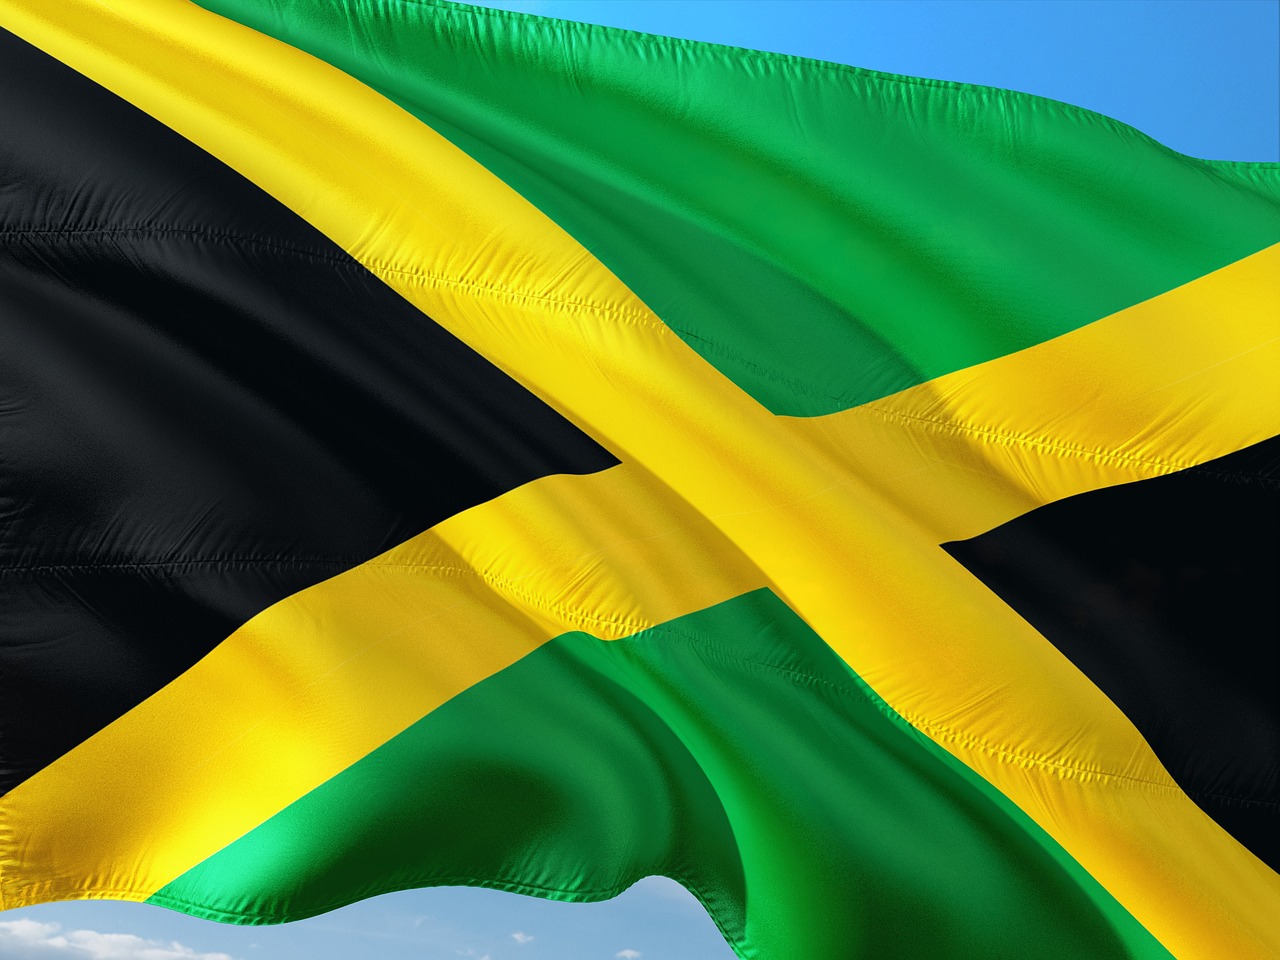 Real Estate Developers and Used Car Dealerships Will Soon be Brought Under Jamaica’s Anti-Money Laundering Laws